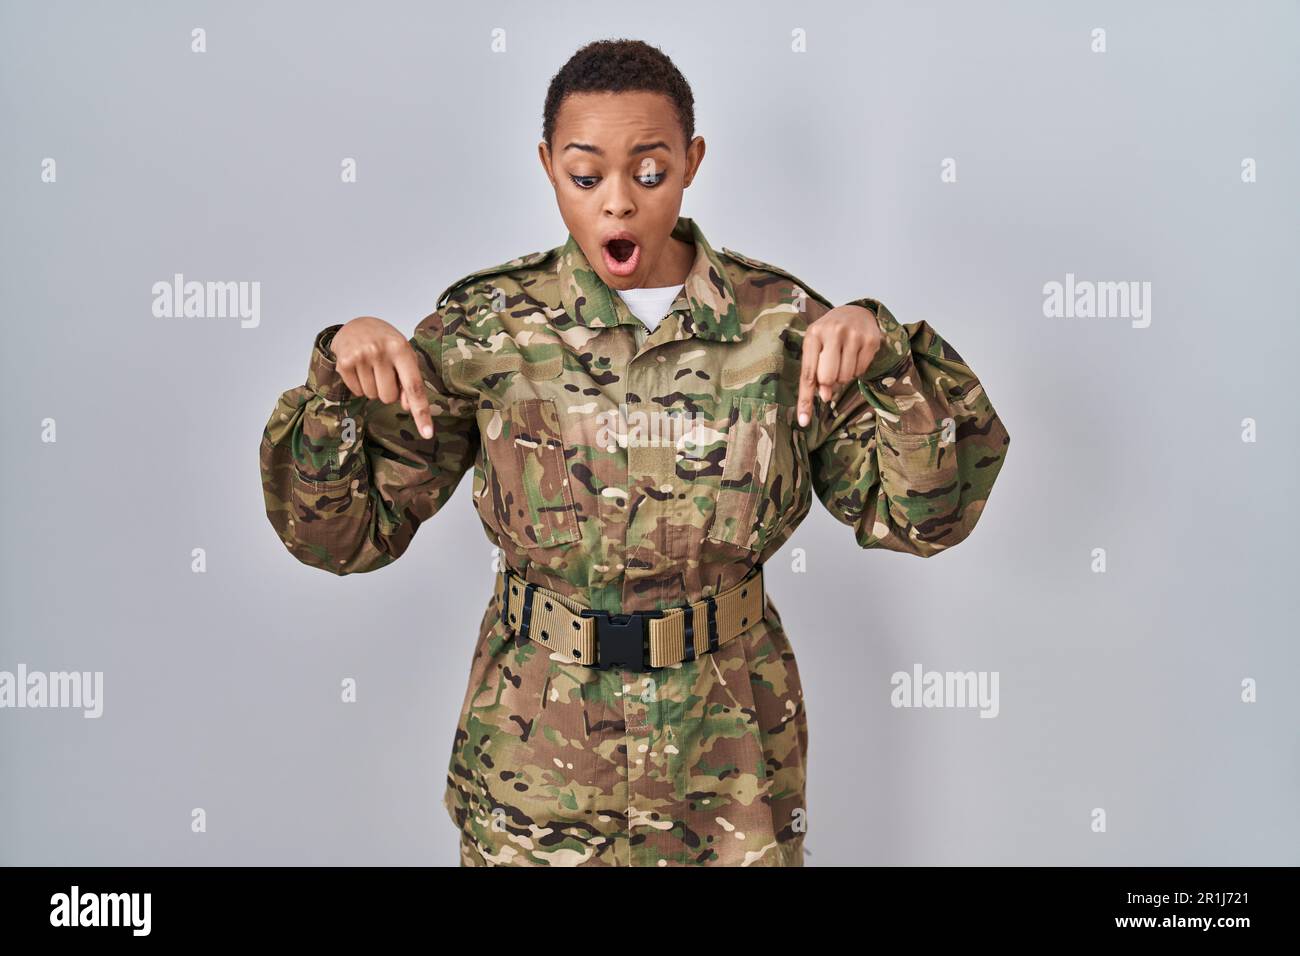 Beautiful african american woman wearing camouflage army uniform pointing down with fingers showing advertisement, surprised face and open mouth Stock Photo